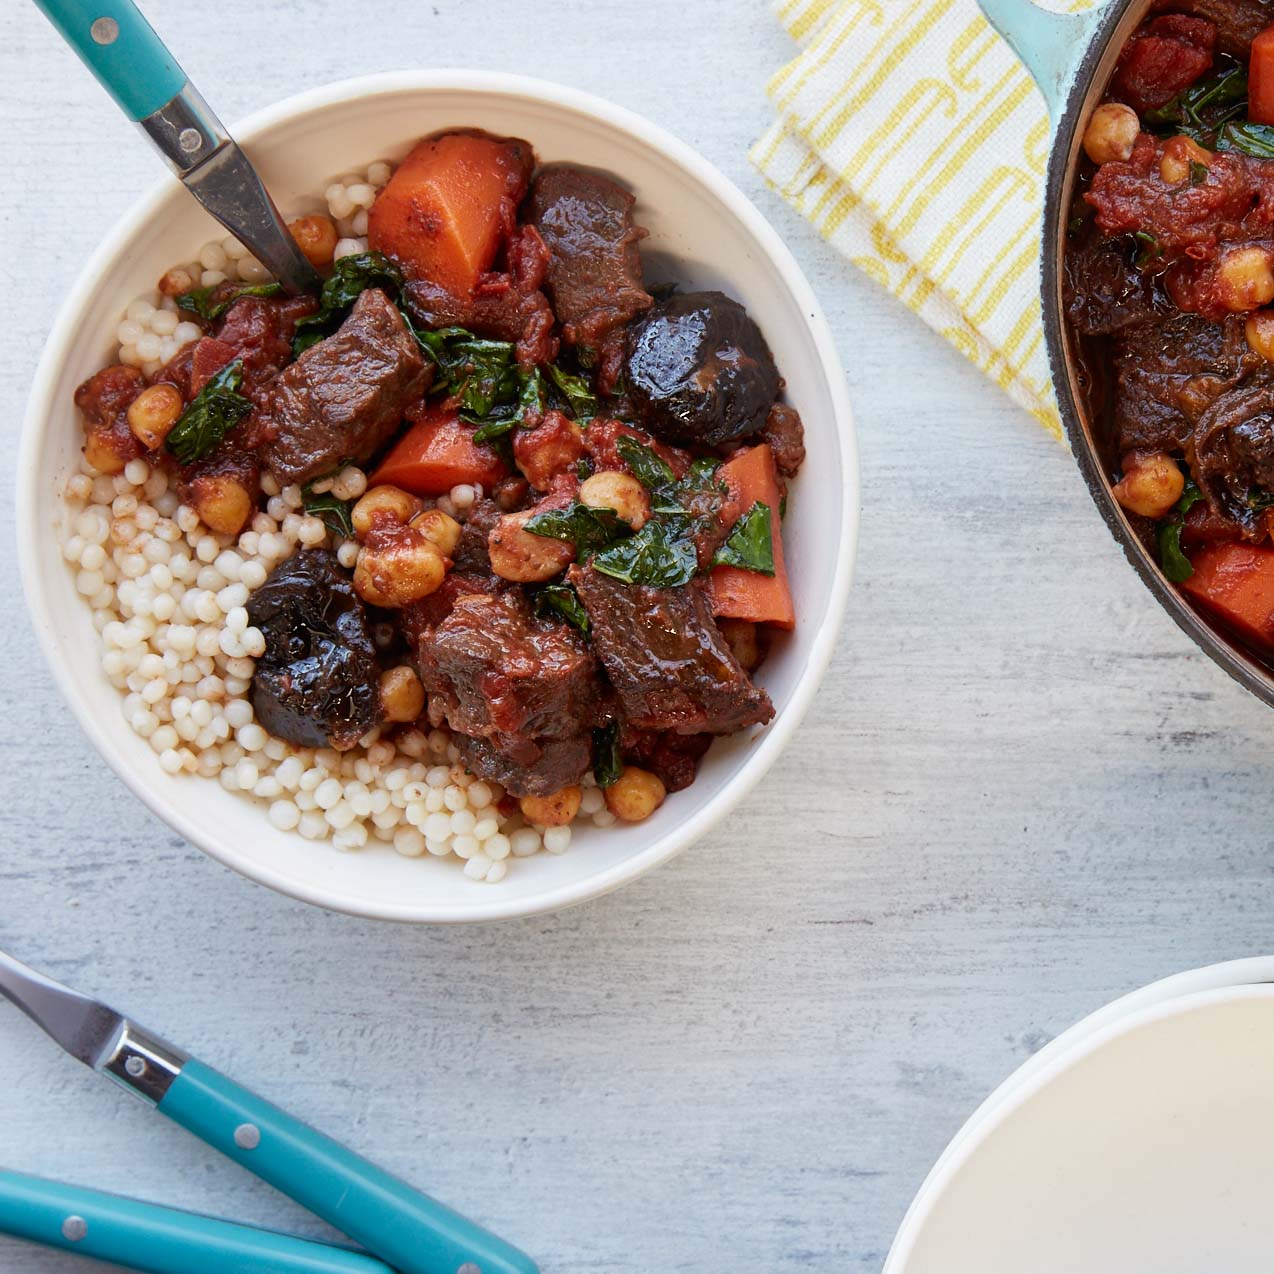 <p>Dried Plums, garam masala, and cinnamon add spice  to beef stew while chickpeas and kale balance the richness and make it a complete meal.</p>
